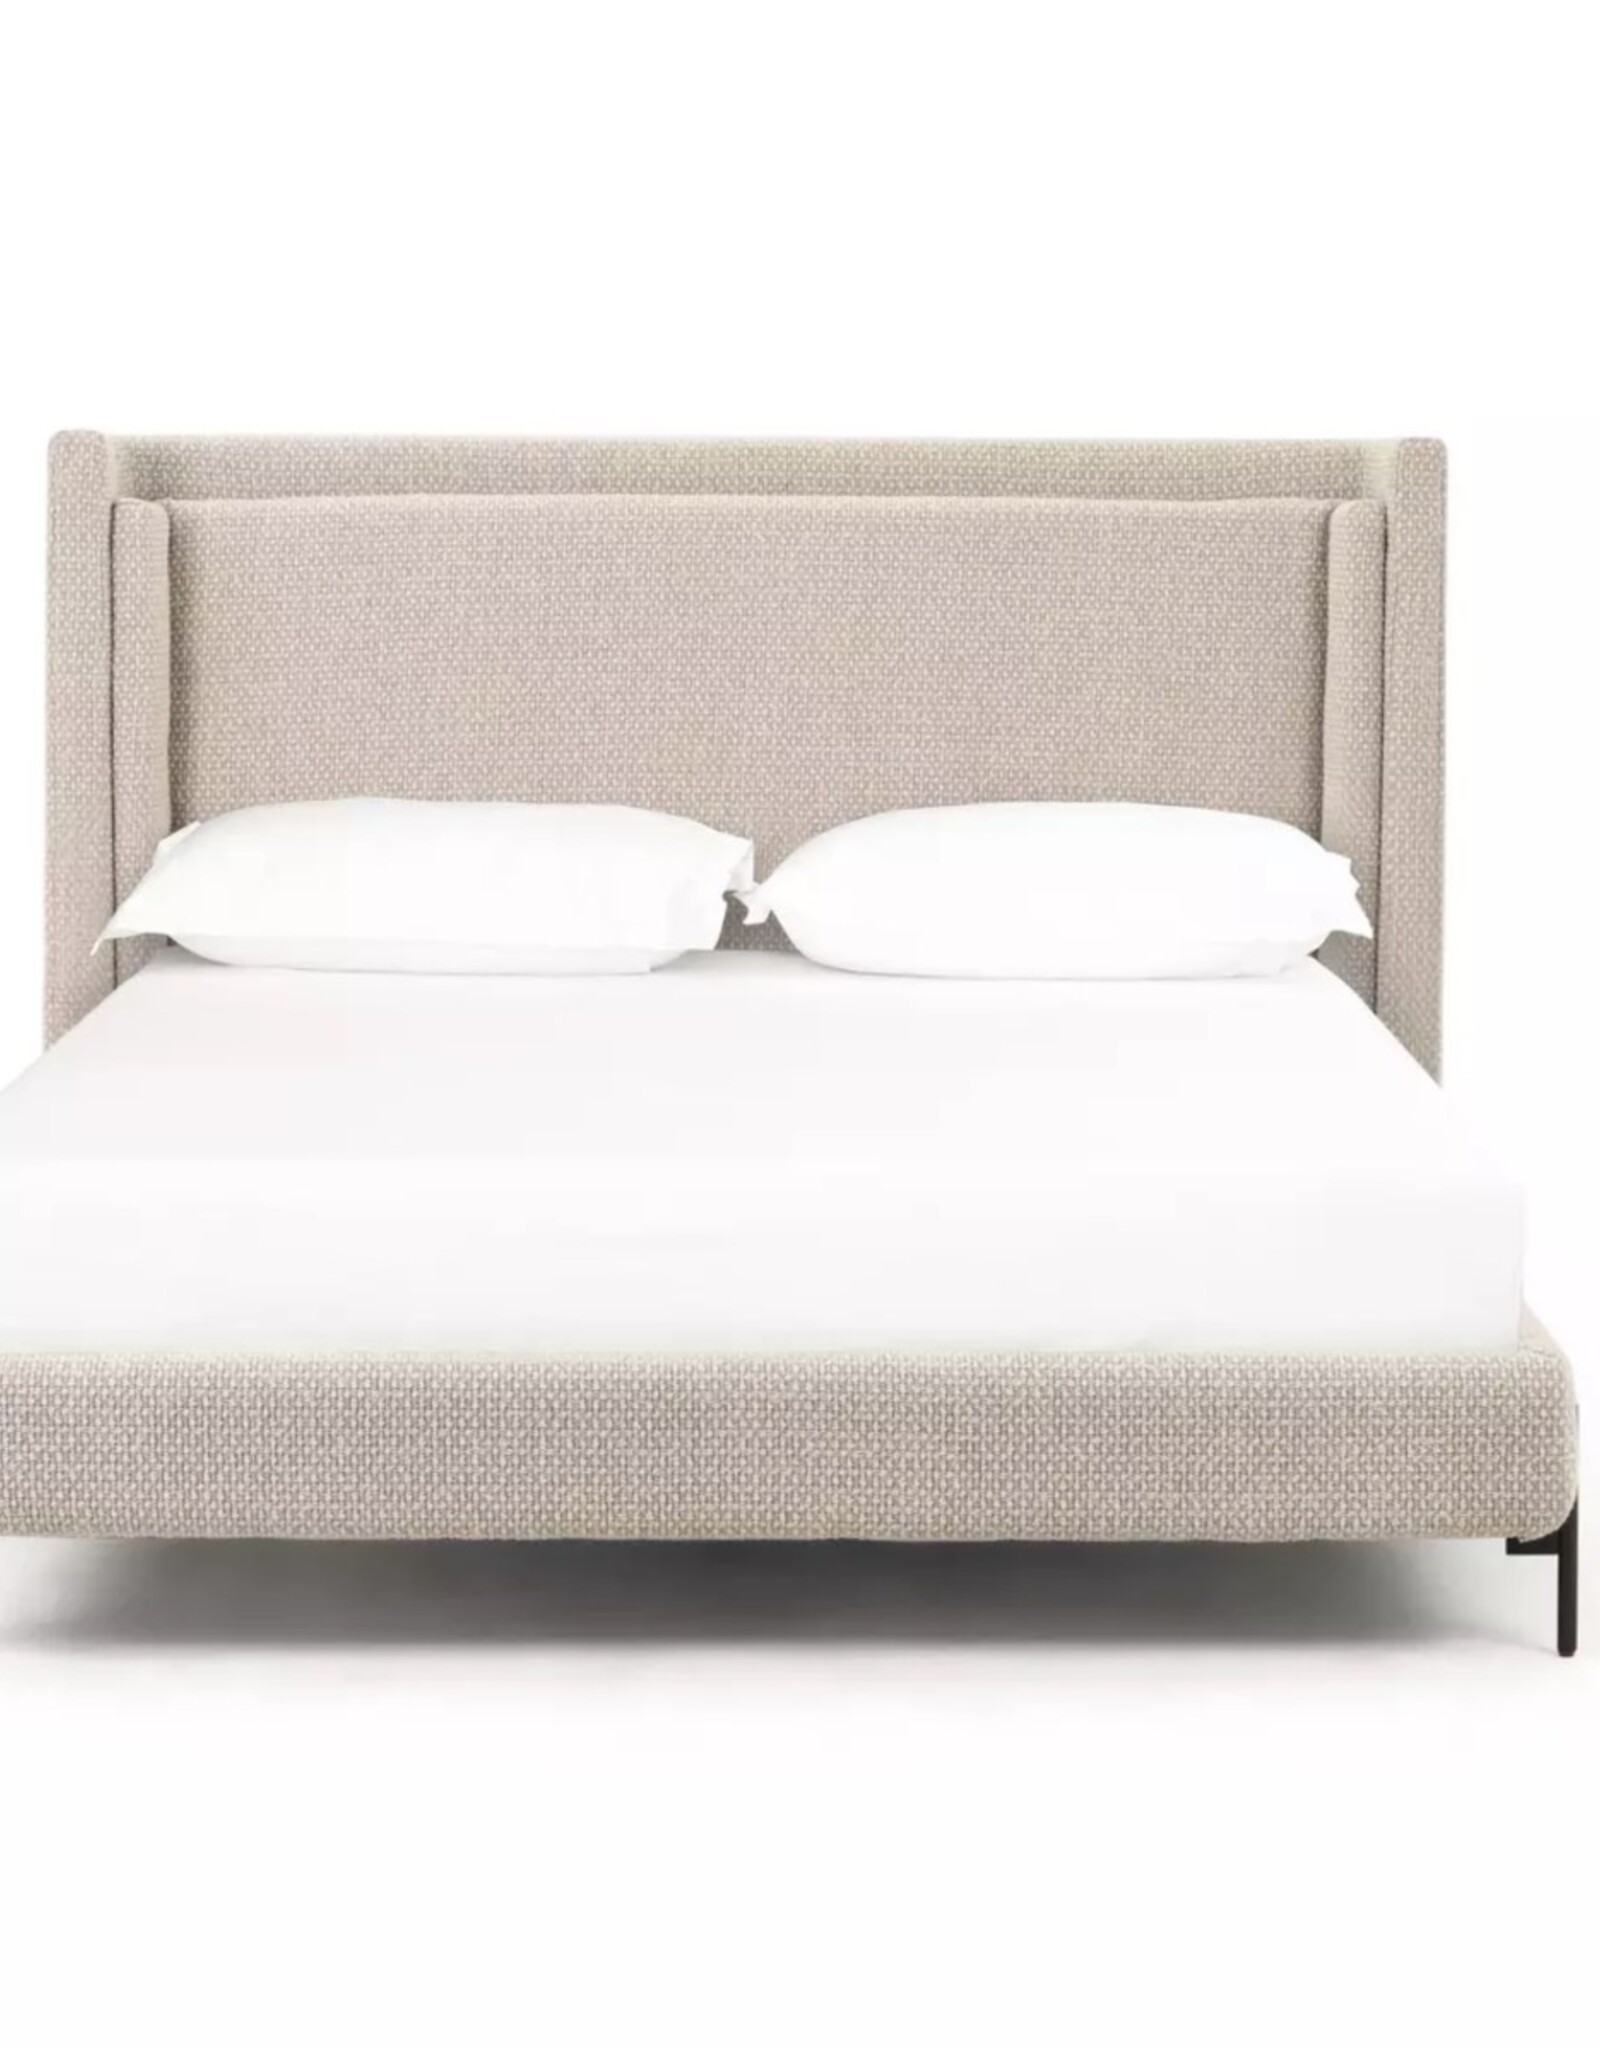 Dobson Bed in Perin Oatmeal - King